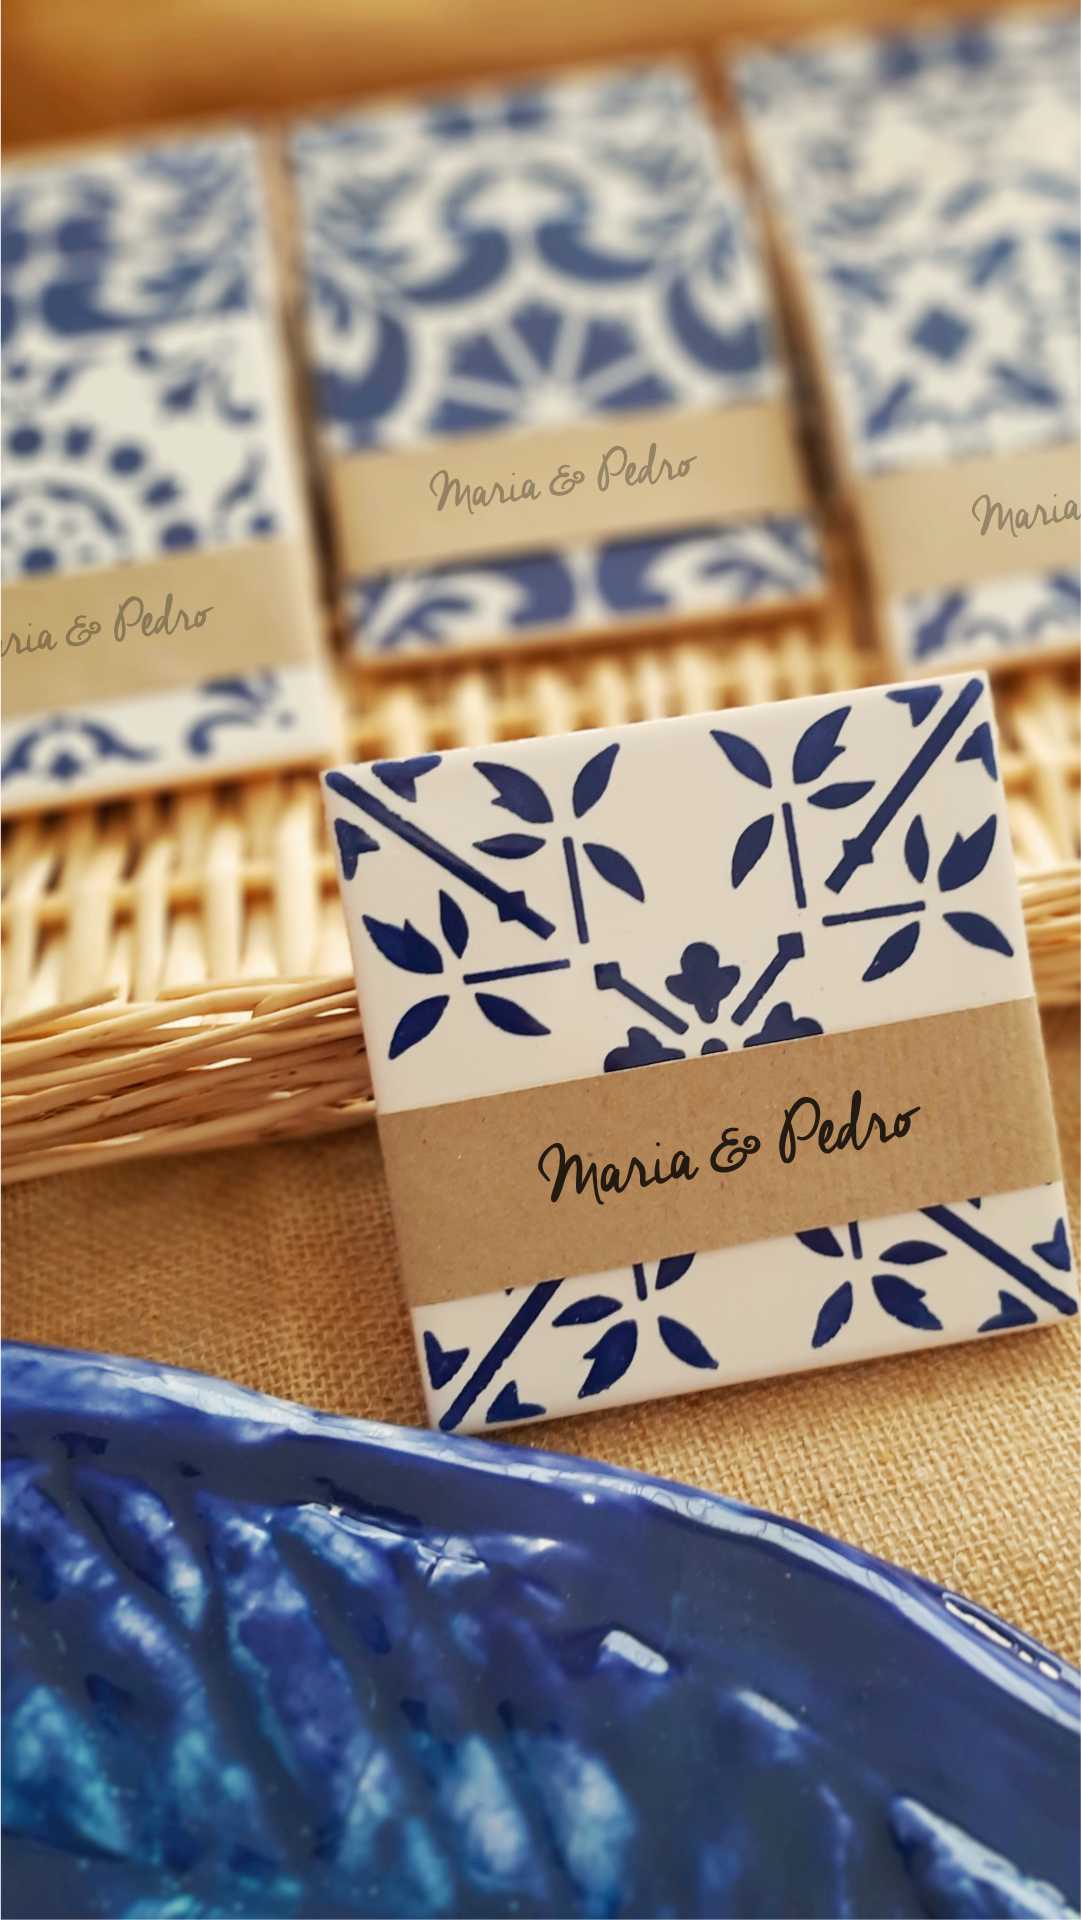 a hand painted wedding favor tile for guests